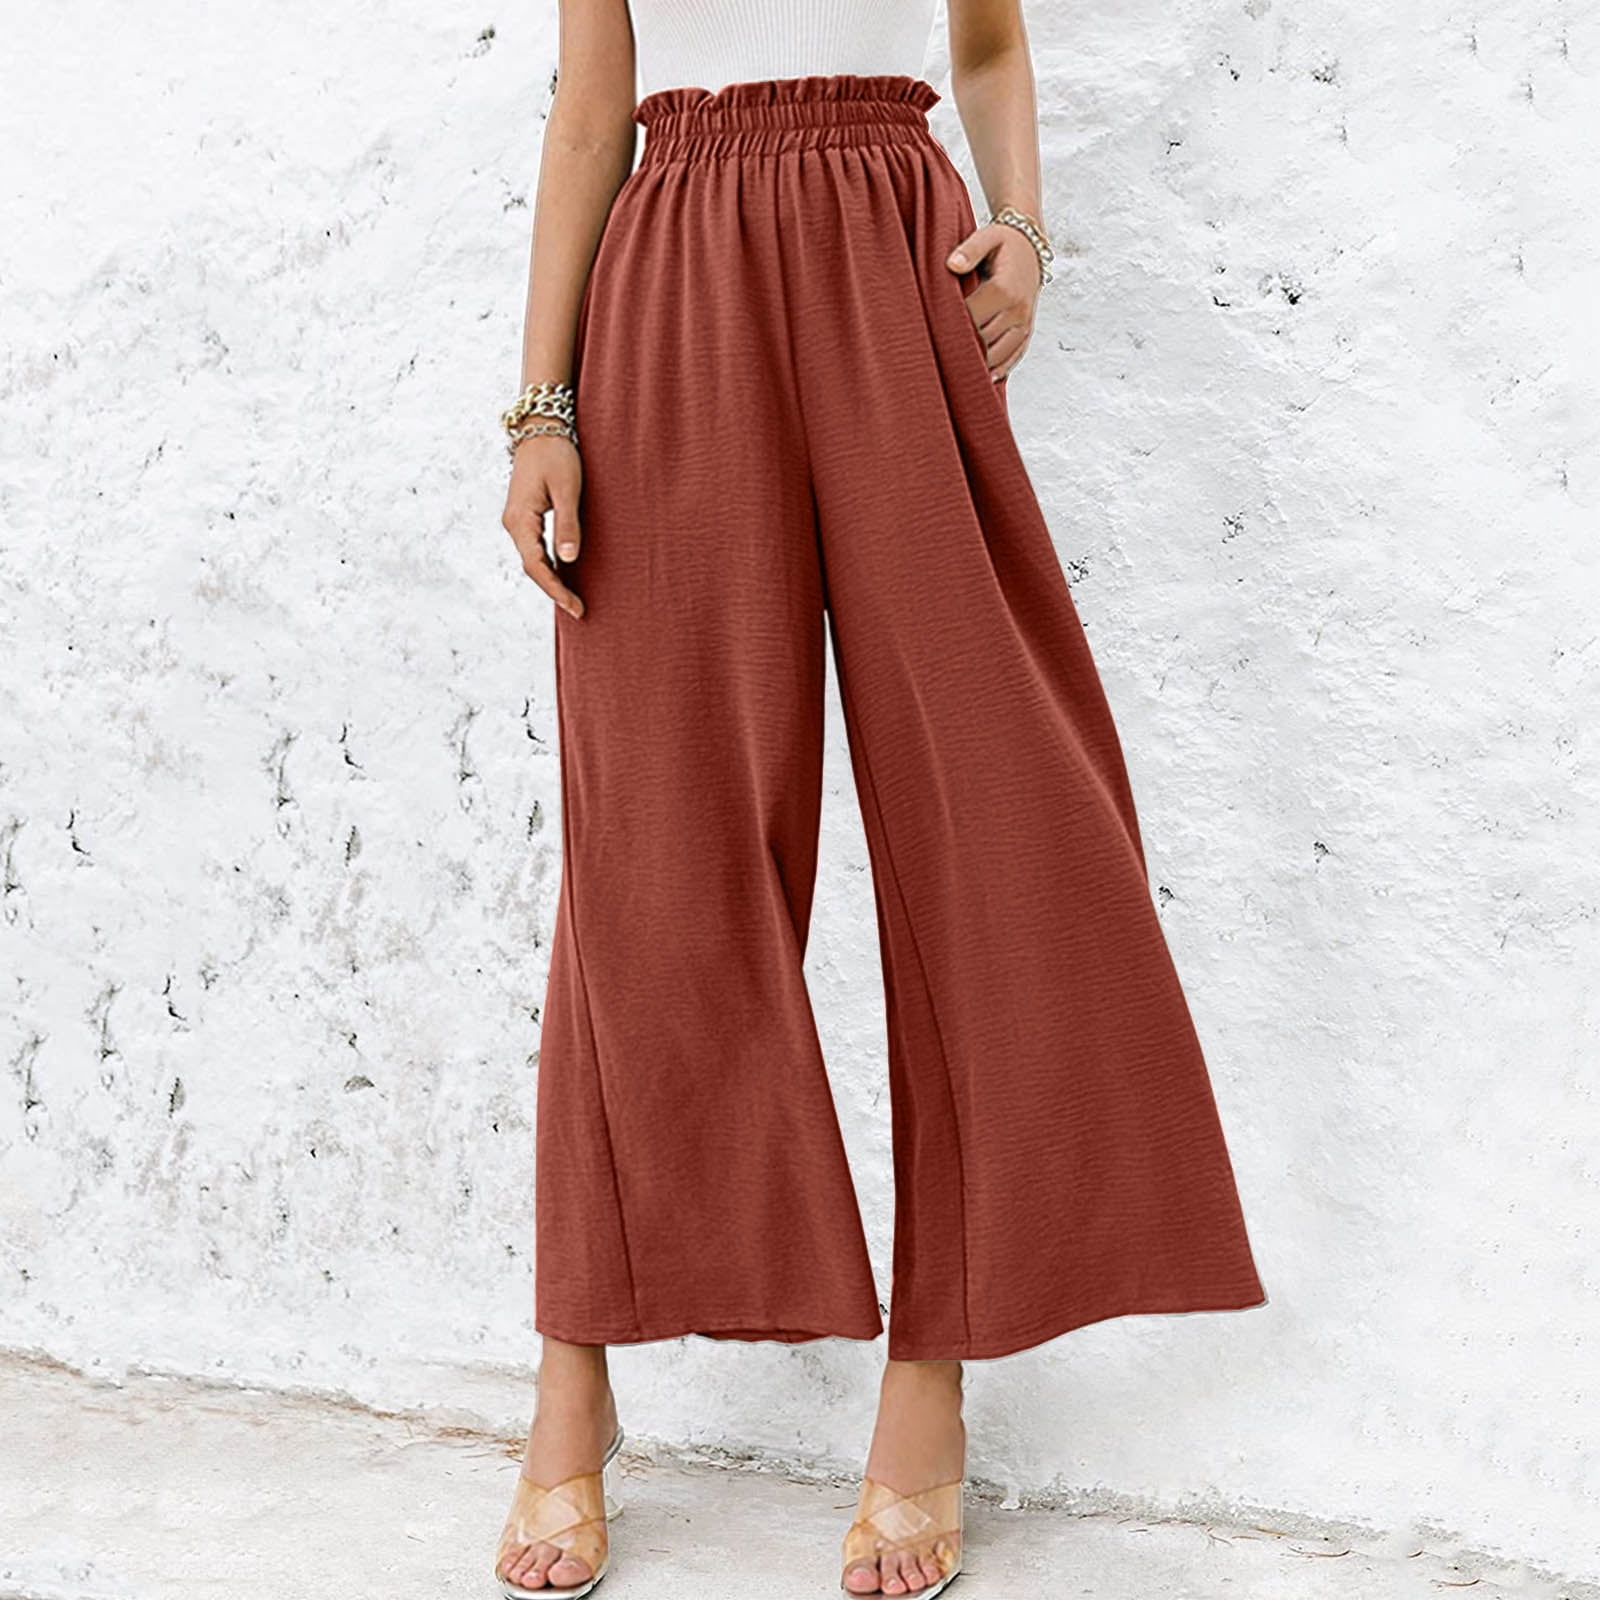 Buy Wine Palazzo Pant Cotton for Best Price, Reviews, Free Shipping